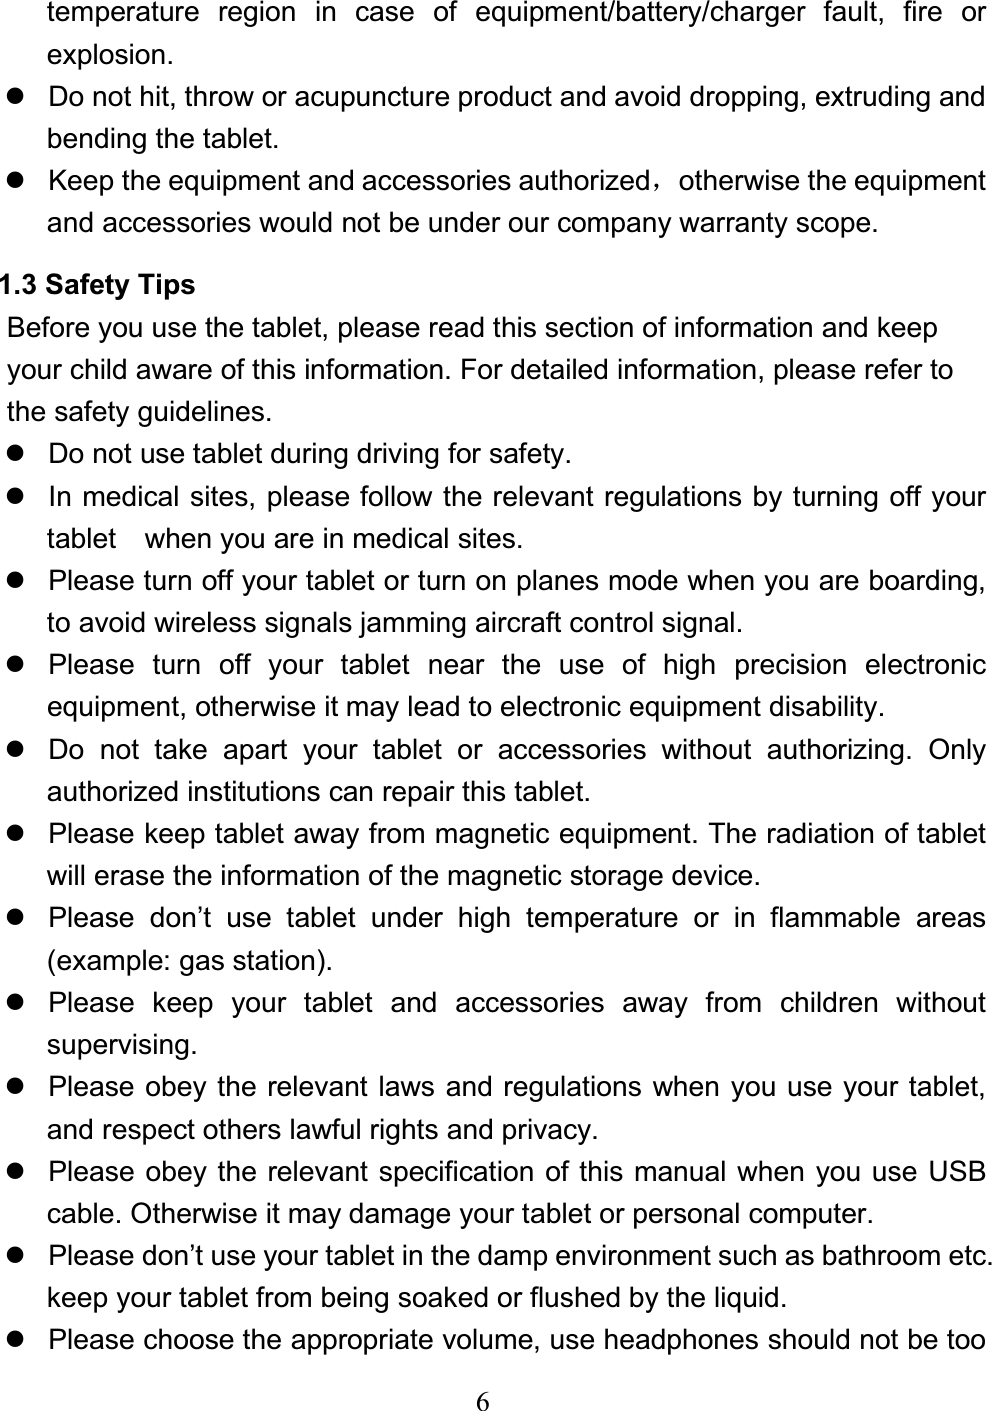 6temperature region in case of equipment/battery/charger fault, fire or explosion. z  Do not hit, throw or acupuncture product and avoid dropping, extruding and bending the tablet. z  Keep the equipment and accessories authorizedˈotherwise the equipment and accessories would not be under our company warranty scope. 1.3 Safety Tips Before you use the tablet, please read this section of information and keep your child aware of this information. For detailed information, please refer to the safety guidelines. z  Do not use tablet during driving for safety. z  In medical sites, please follow the relevant regulations by turning off your tablet    when you are in medical sites. z  Please turn off your tablet or turn on planes mode when you are boarding, to avoid wireless signals jamming aircraft control signal. z  Please turn off your tablet near the use of high precision electronic equipment, otherwise it may lead to electronic equipment disability. z  Do not take apart your tablet or accessories without authorizing. Only authorized institutions can repair this tablet. z  Please keep tablet away from magnetic equipment. The radiation of tablet will erase the information of the magnetic storage device. z  Please don’t use tablet under high temperature or in flammable areas (example: gas station). z  Please keep your tablet and accessories away from children without supervising.z  Please obey the relevant laws and regulations when you use your tablet, and respect others lawful rights and privacy. z  Please obey the relevant specification of this manual when you use USB cable. Otherwise it may damage your tablet or personal computer. z  Please don’t use your tablet in the damp environment such as bathroom etc. keep your tablet from being soaked or flushed by the liquid. z  Please choose the appropriate volume, use headphones should not be too 